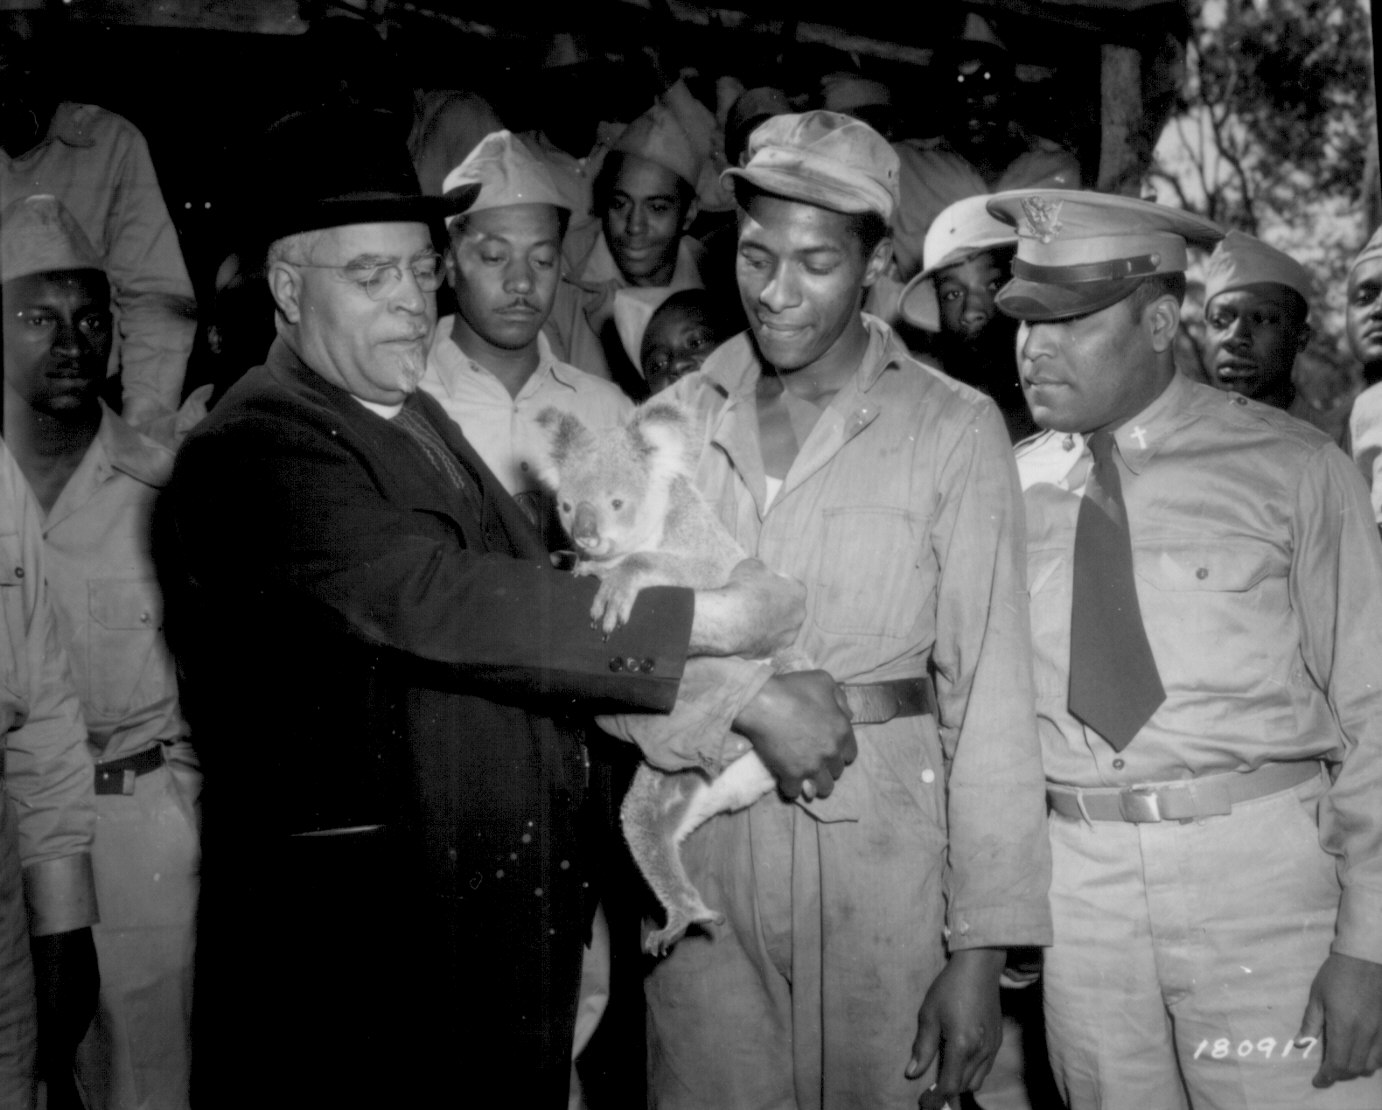 Bishop John Andrew Gregg of African Methodist Church in North Central United States playing with a koala bear while African-American US Army soldiers looked on, Australia, 21 Jul 1943